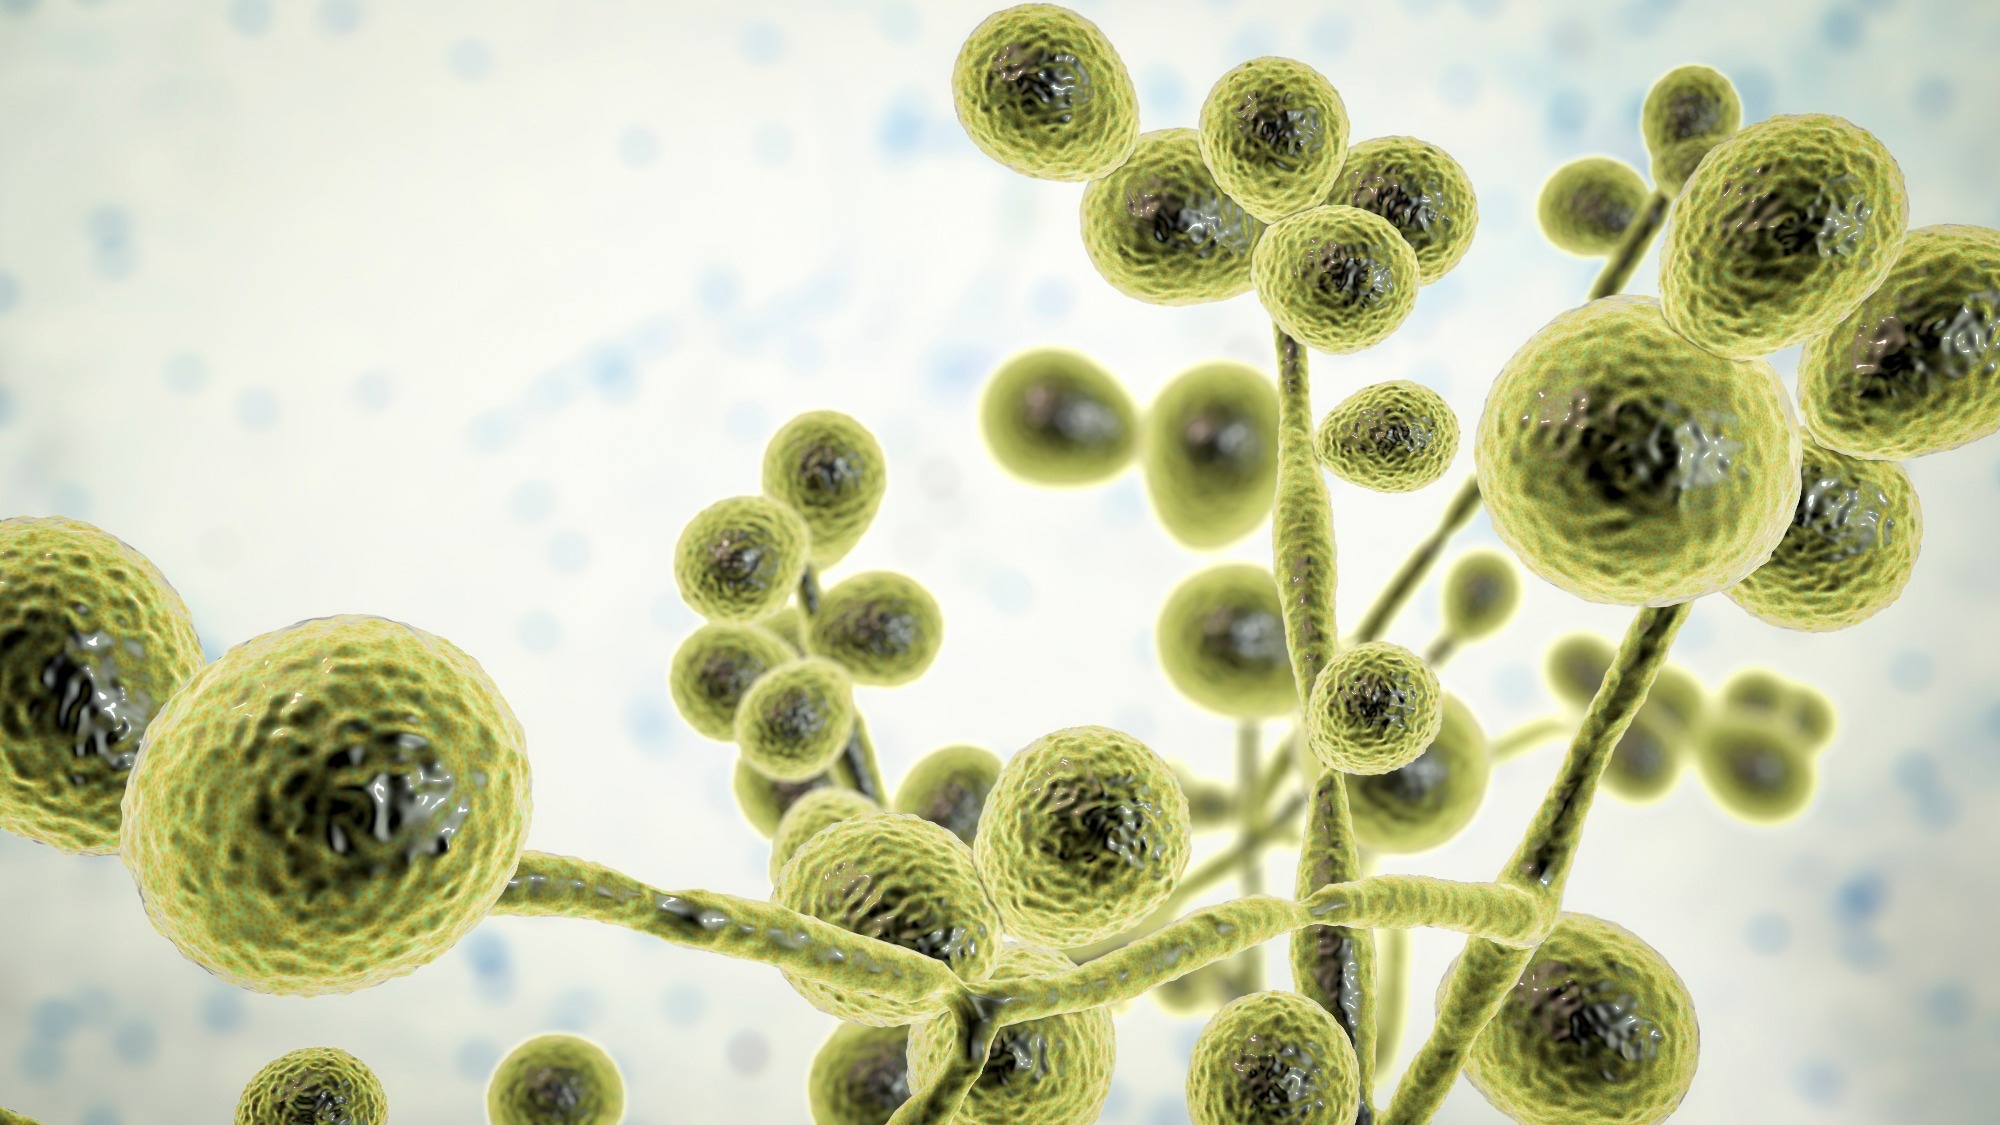 Study: Increasing number of cases and outbreaks caused by Candida auris in the EU/EEA, 2020 to 2021. Image Credit: Kateryna Kon/Shutterstock